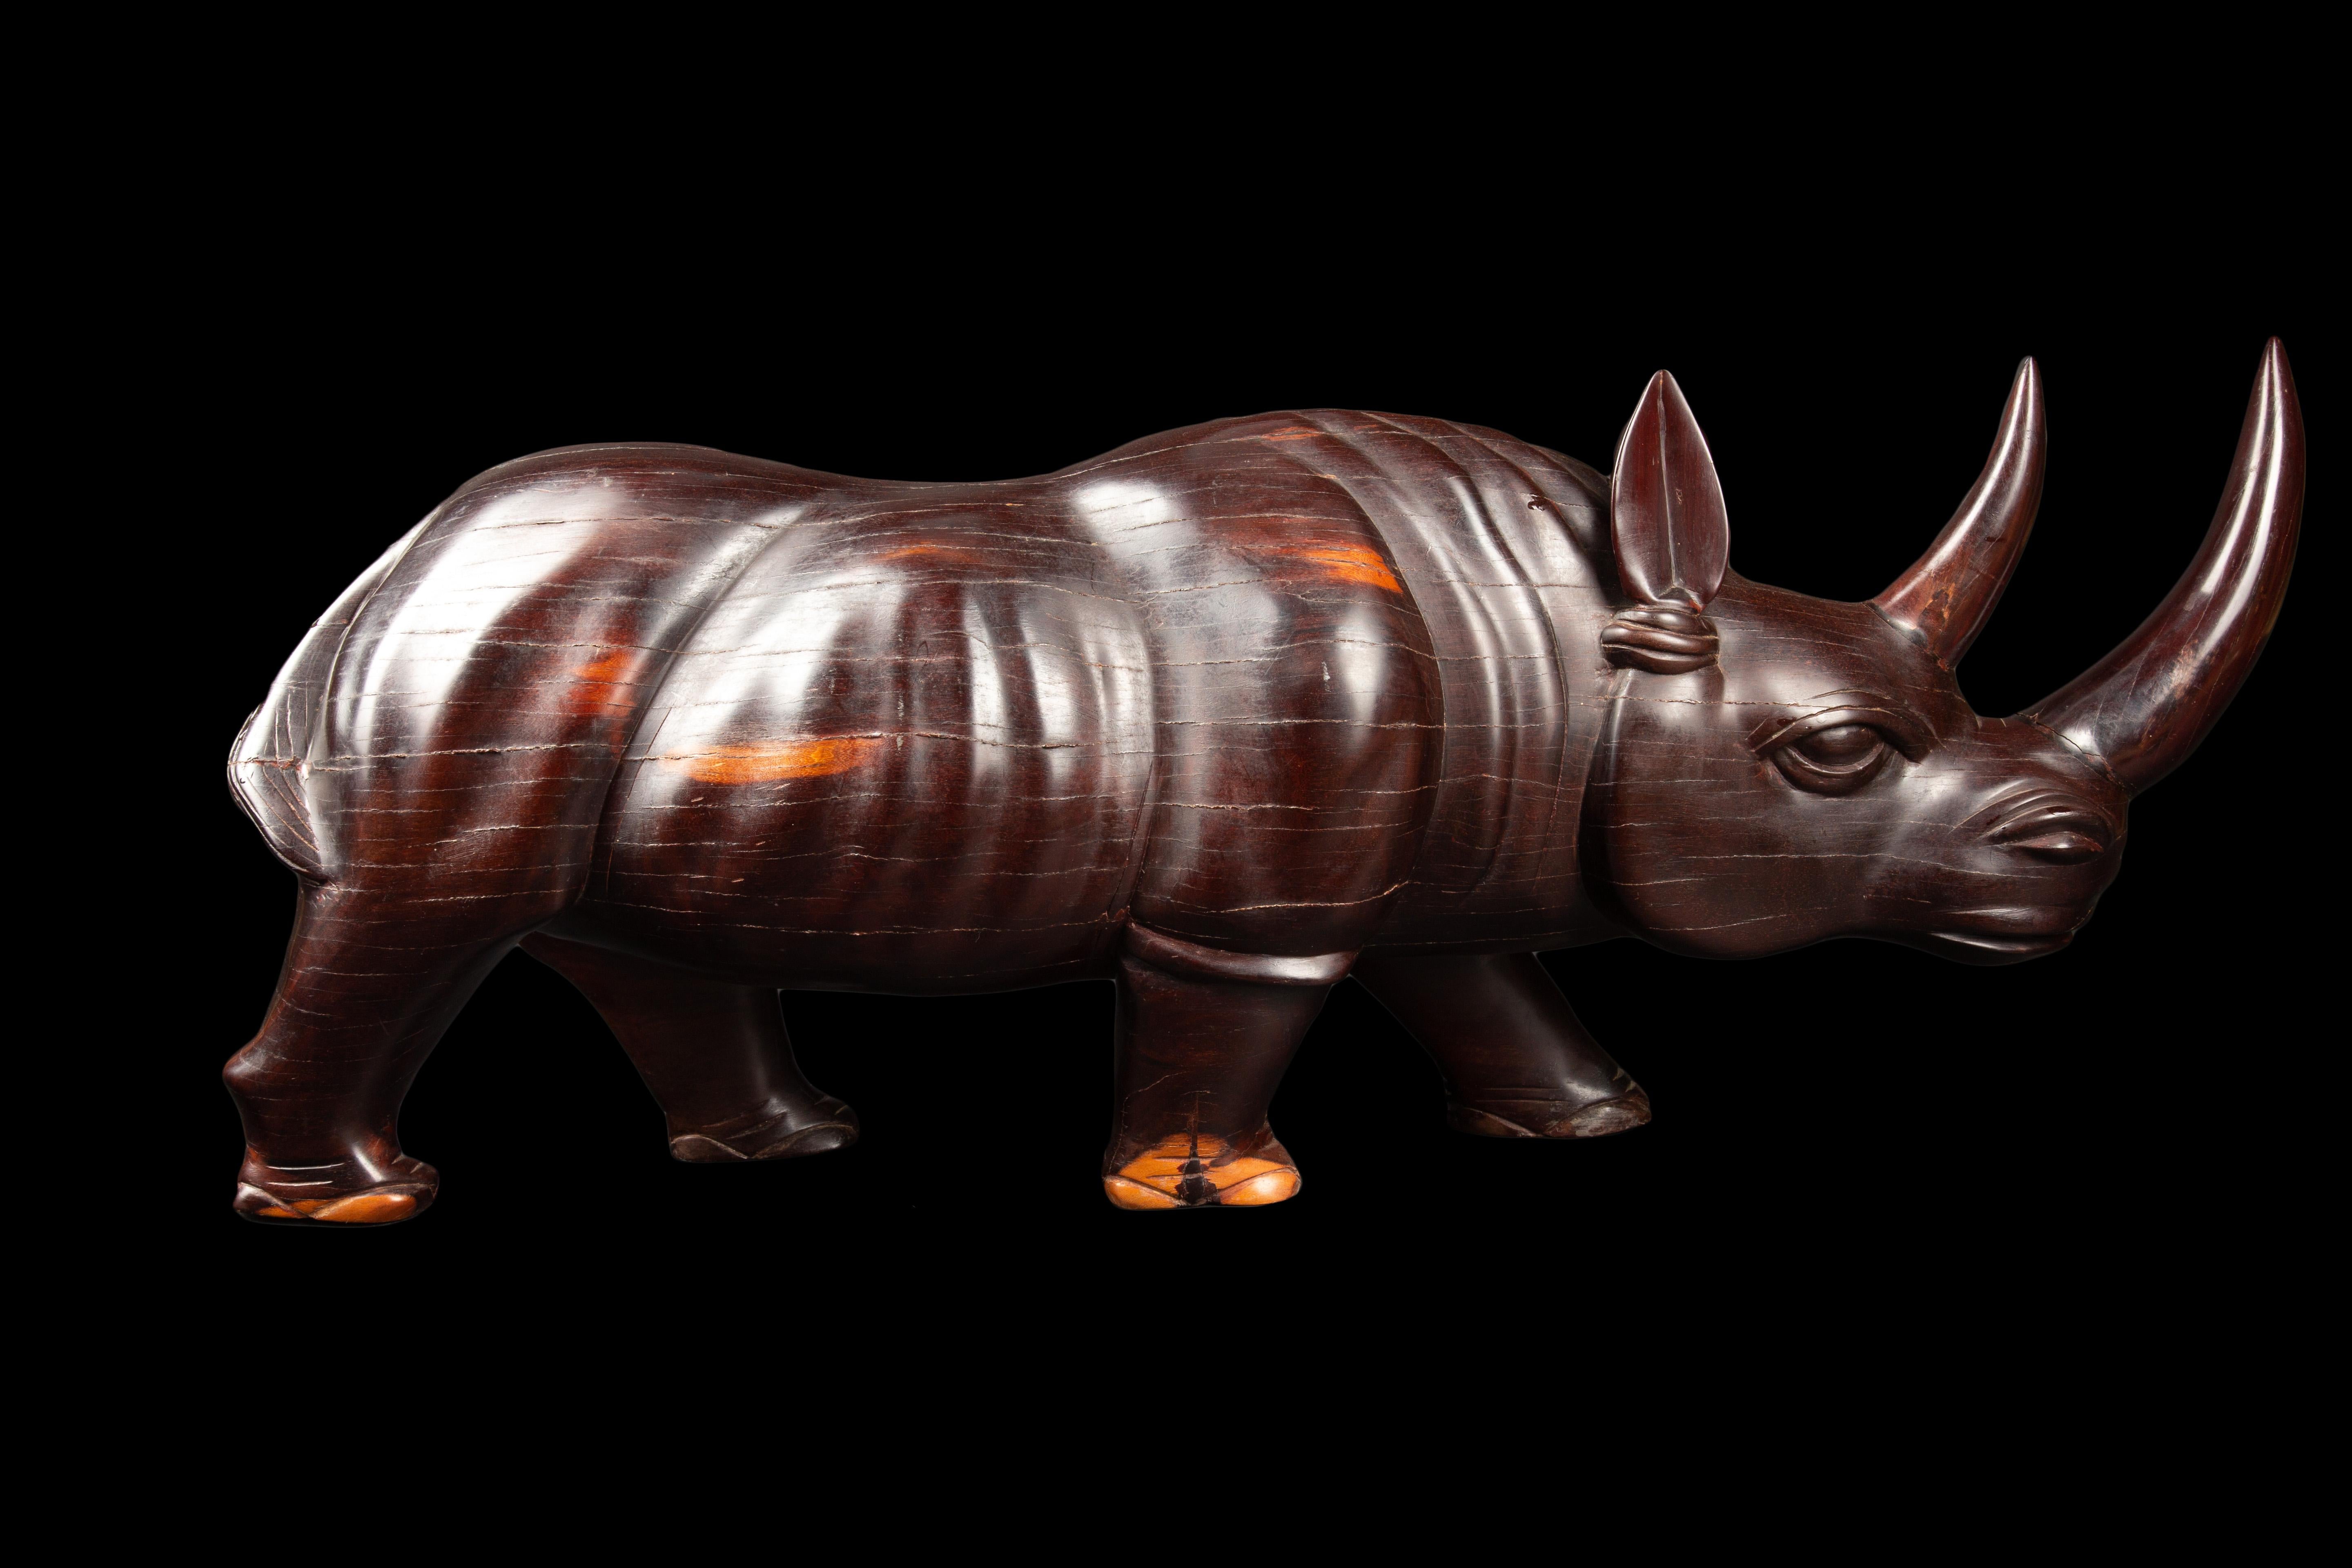 Indulge your senses with the exquisite craftsmanship and timeless elegance of this stunning African Ebony Rhinoceros sculpture. Meticulously hand-carved with utmost precision, this masterpiece showcases the natural beauty and richness of the ebony